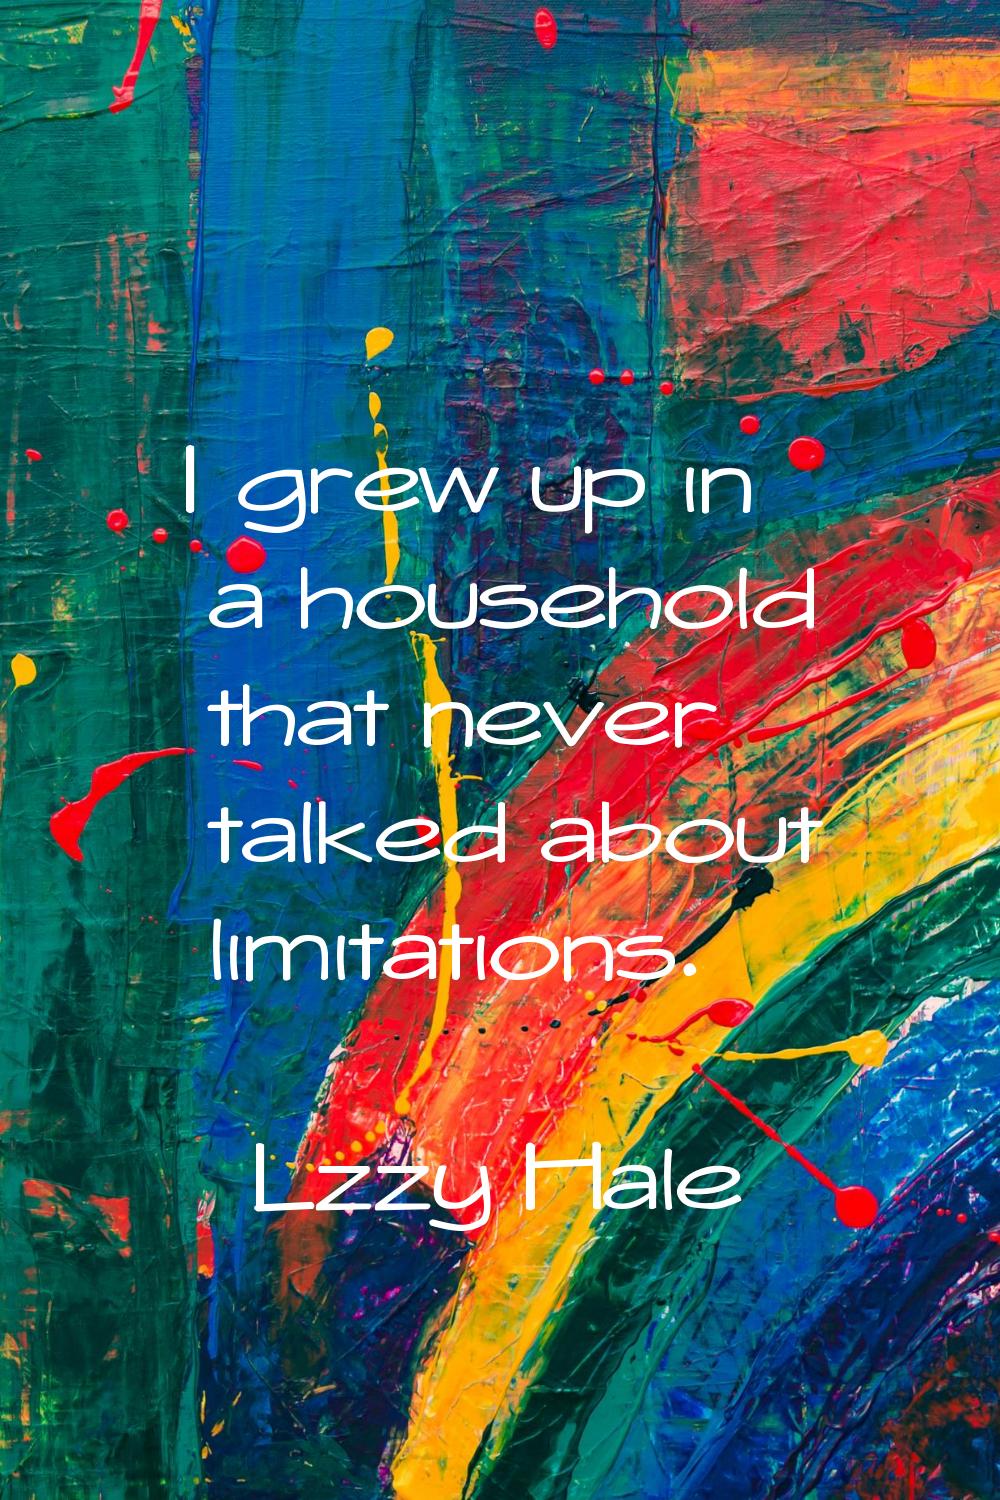 I grew up in a household that never talked about limitations.